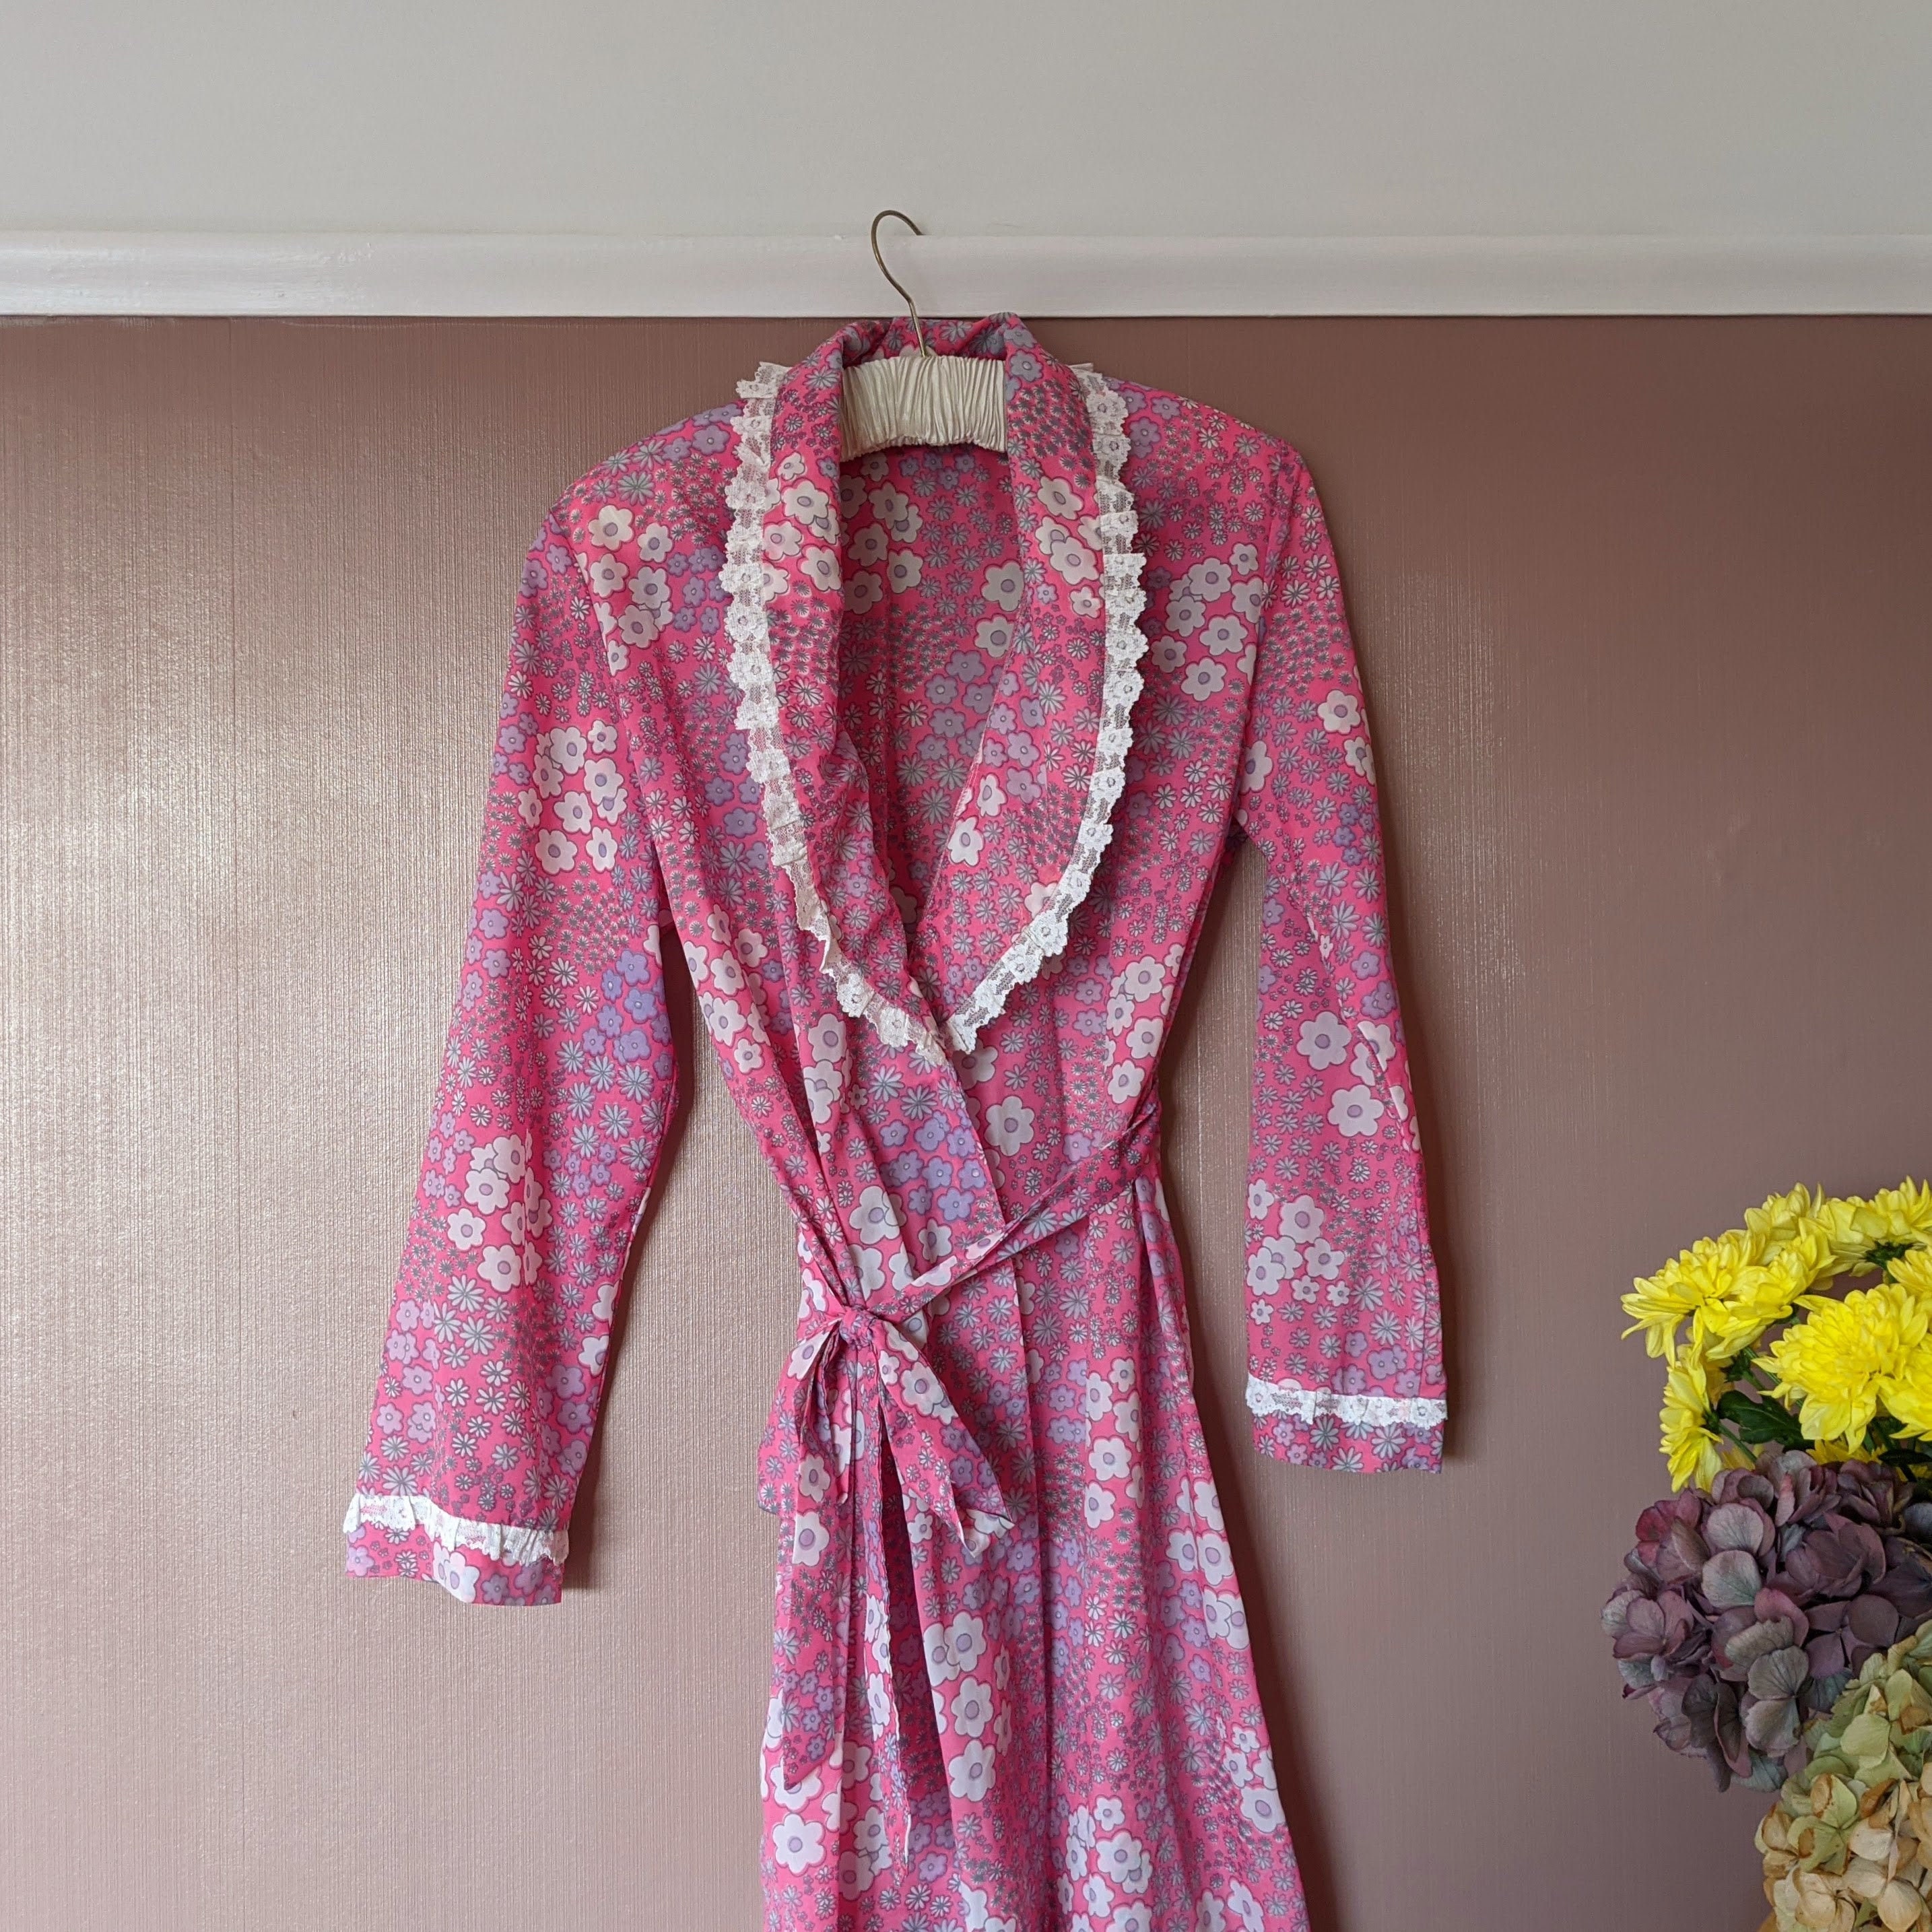 Stunning Pink Floral Robe With White Lace Trim Size M Pink - Etsy UK